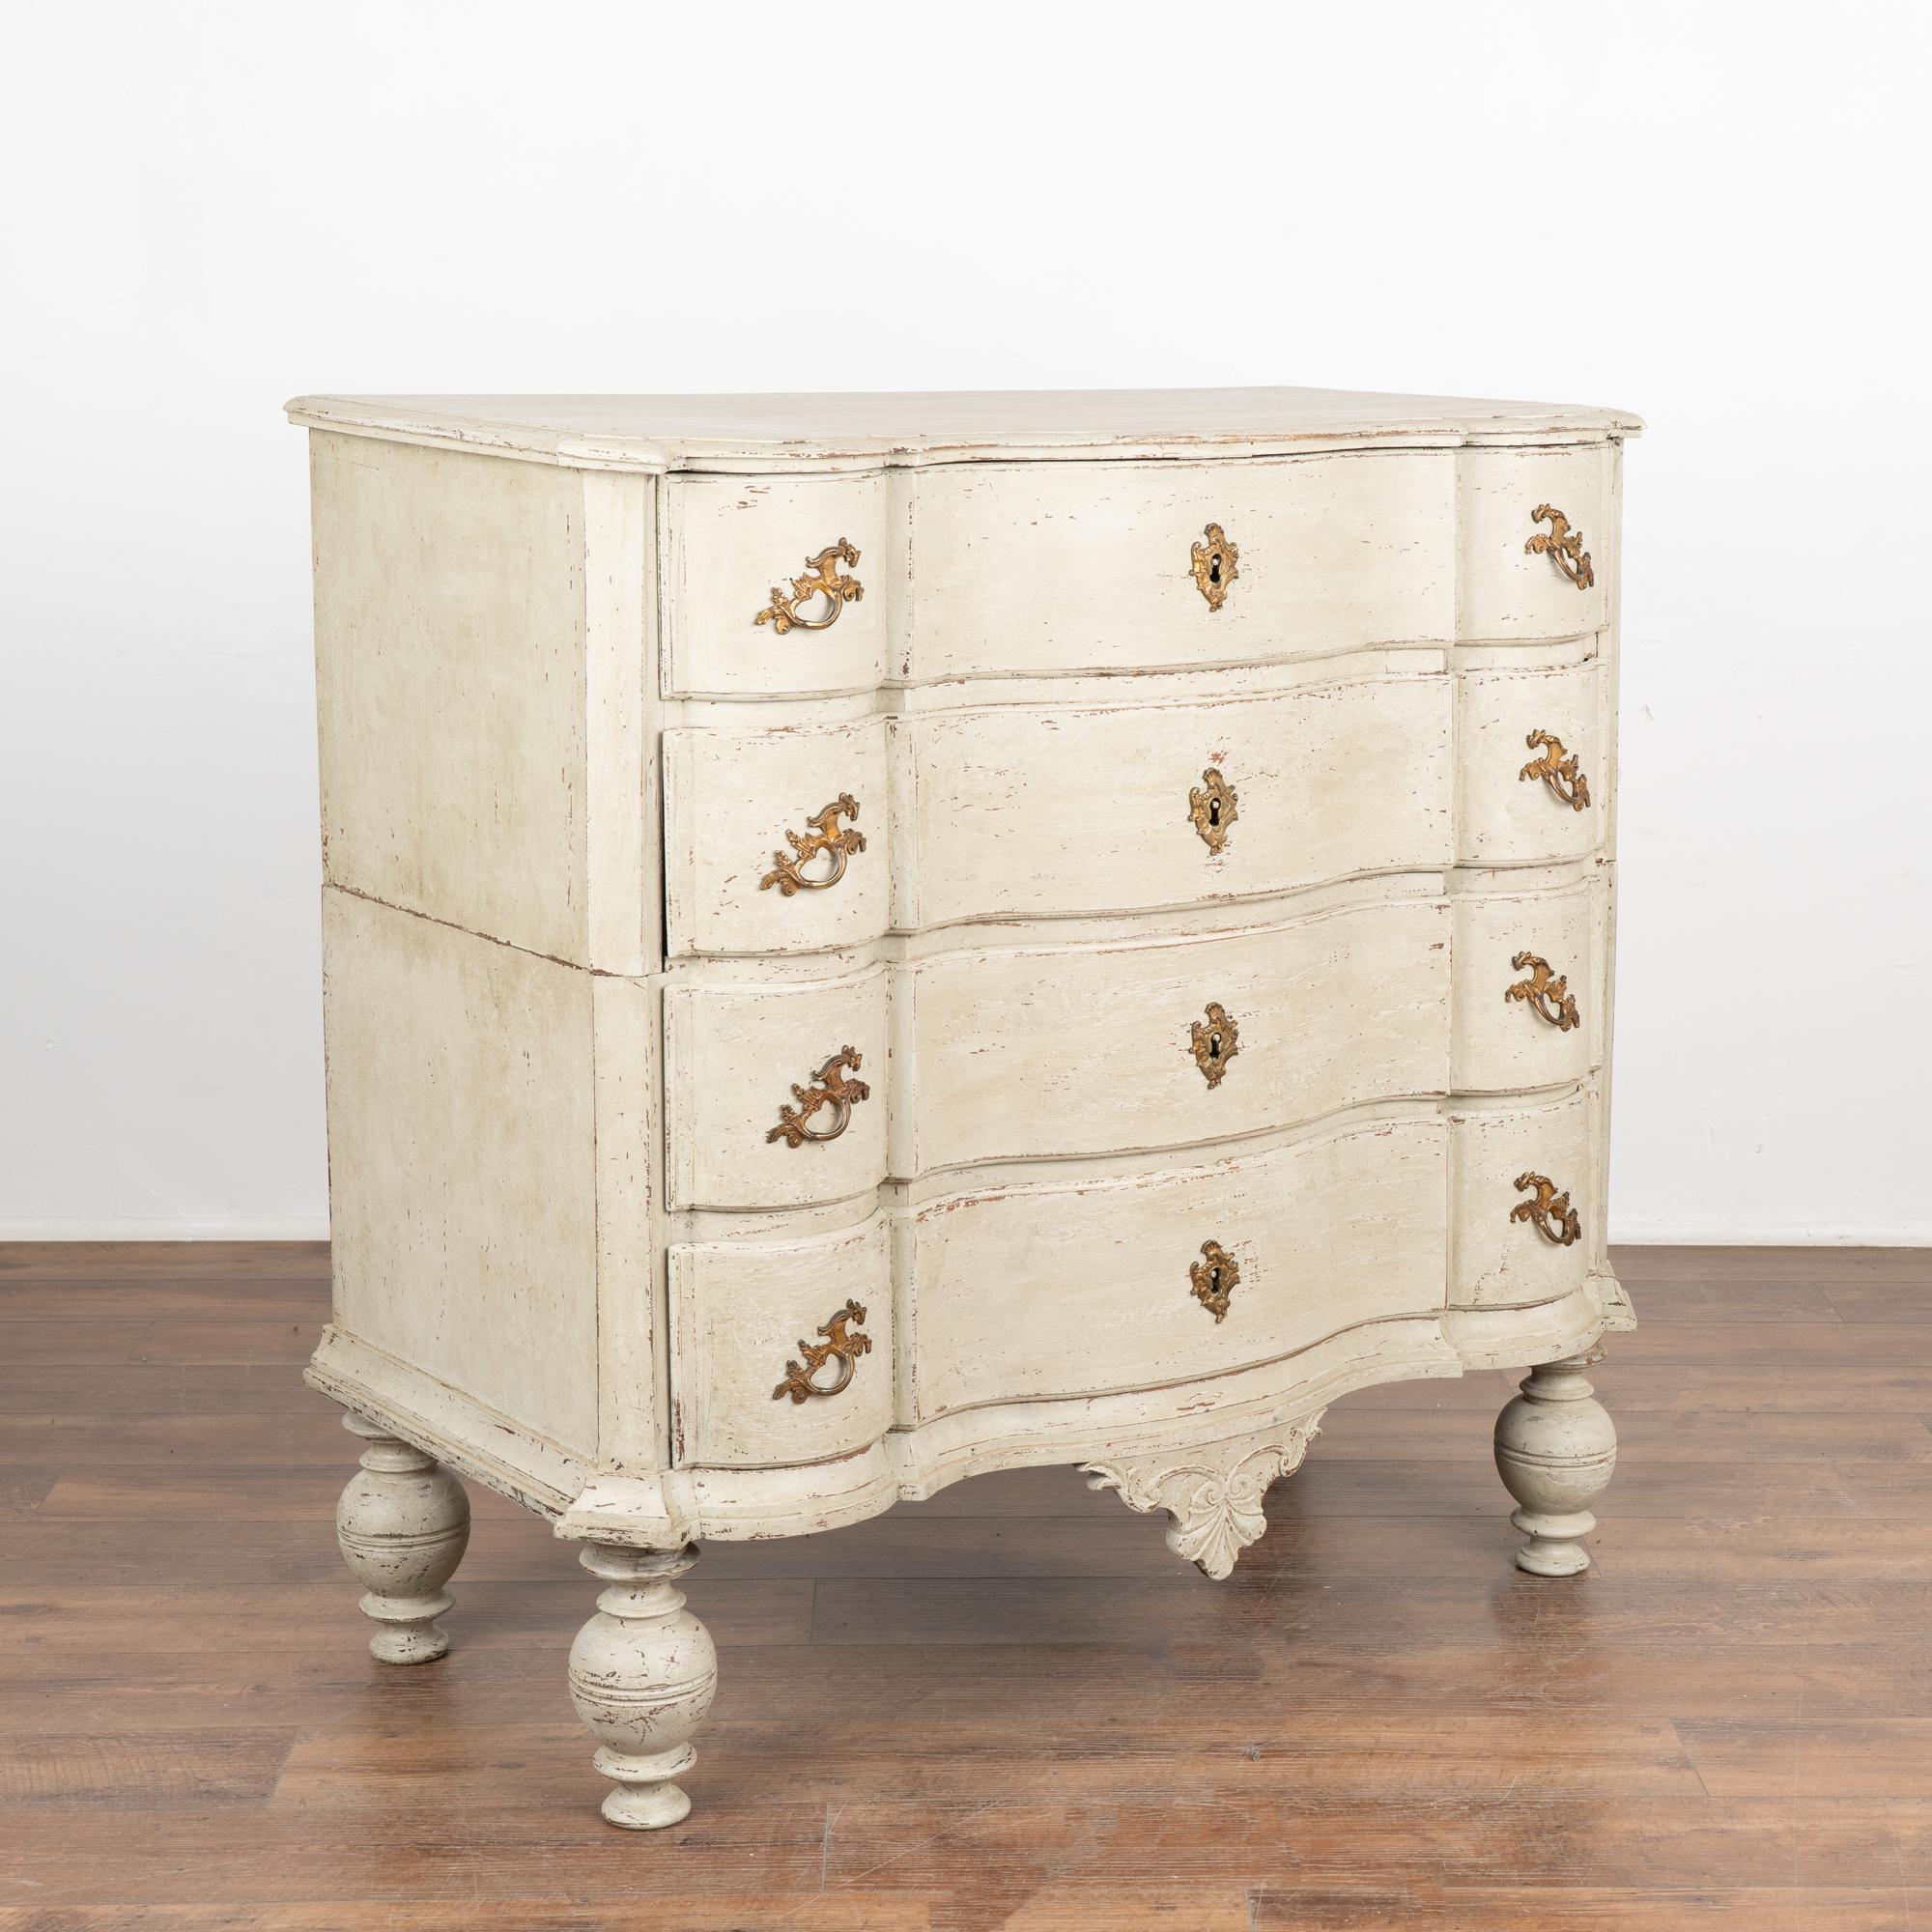 This antique rococo large oak chest of drawers features a serpentine front, brass hardware pulls and is raised on large turned feet.
The newer, professionally applied and layered white painted finish has soft gray undertones and is gently scraped